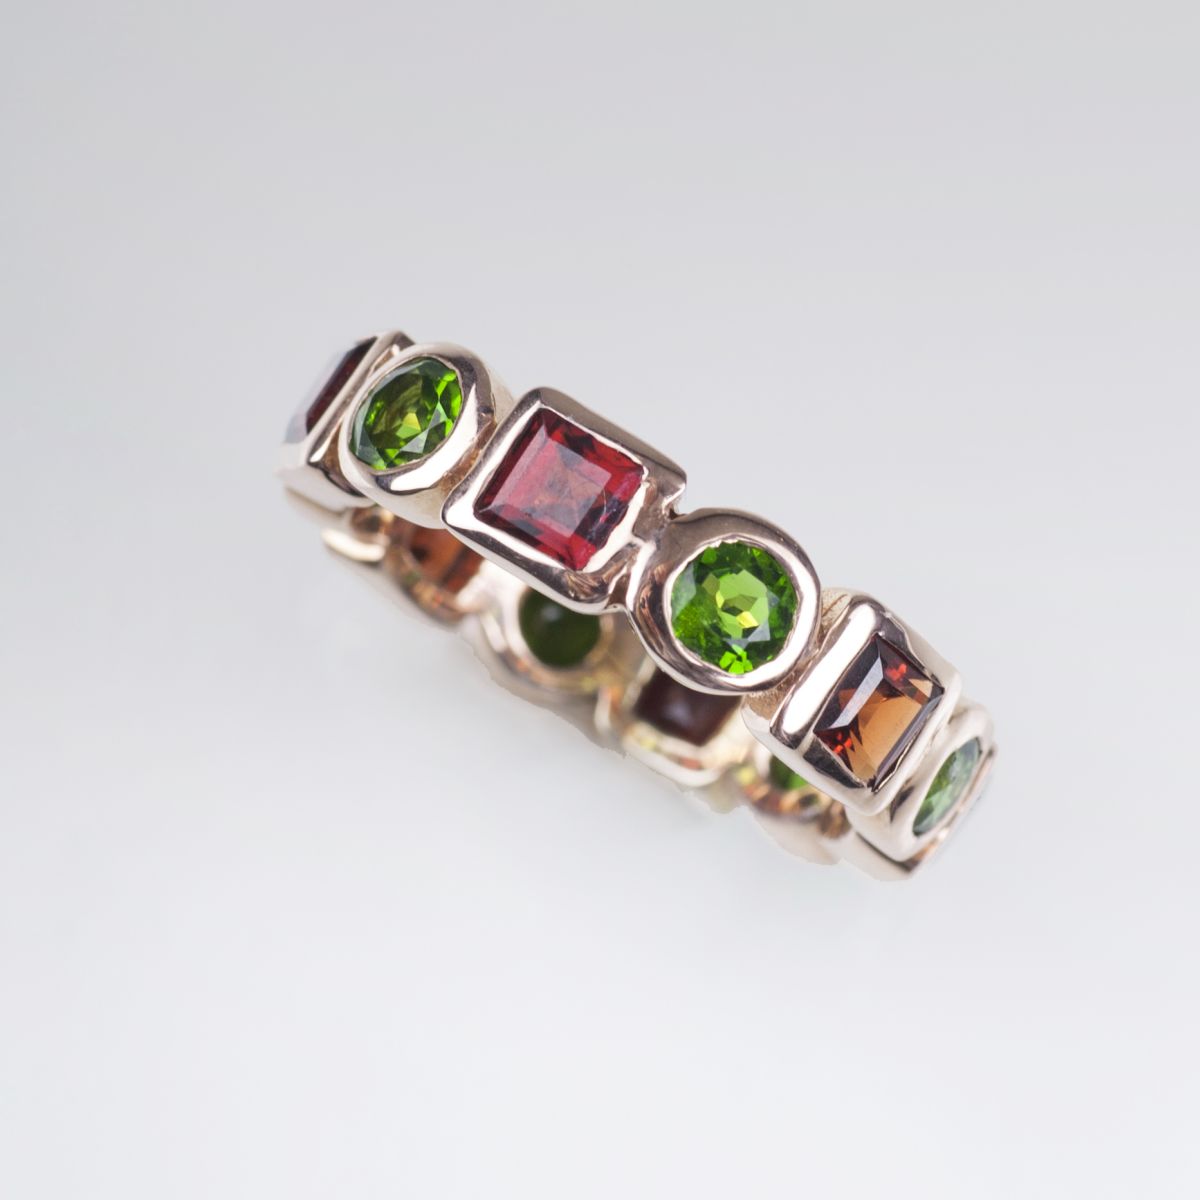 A memory ring with diopside and garnet